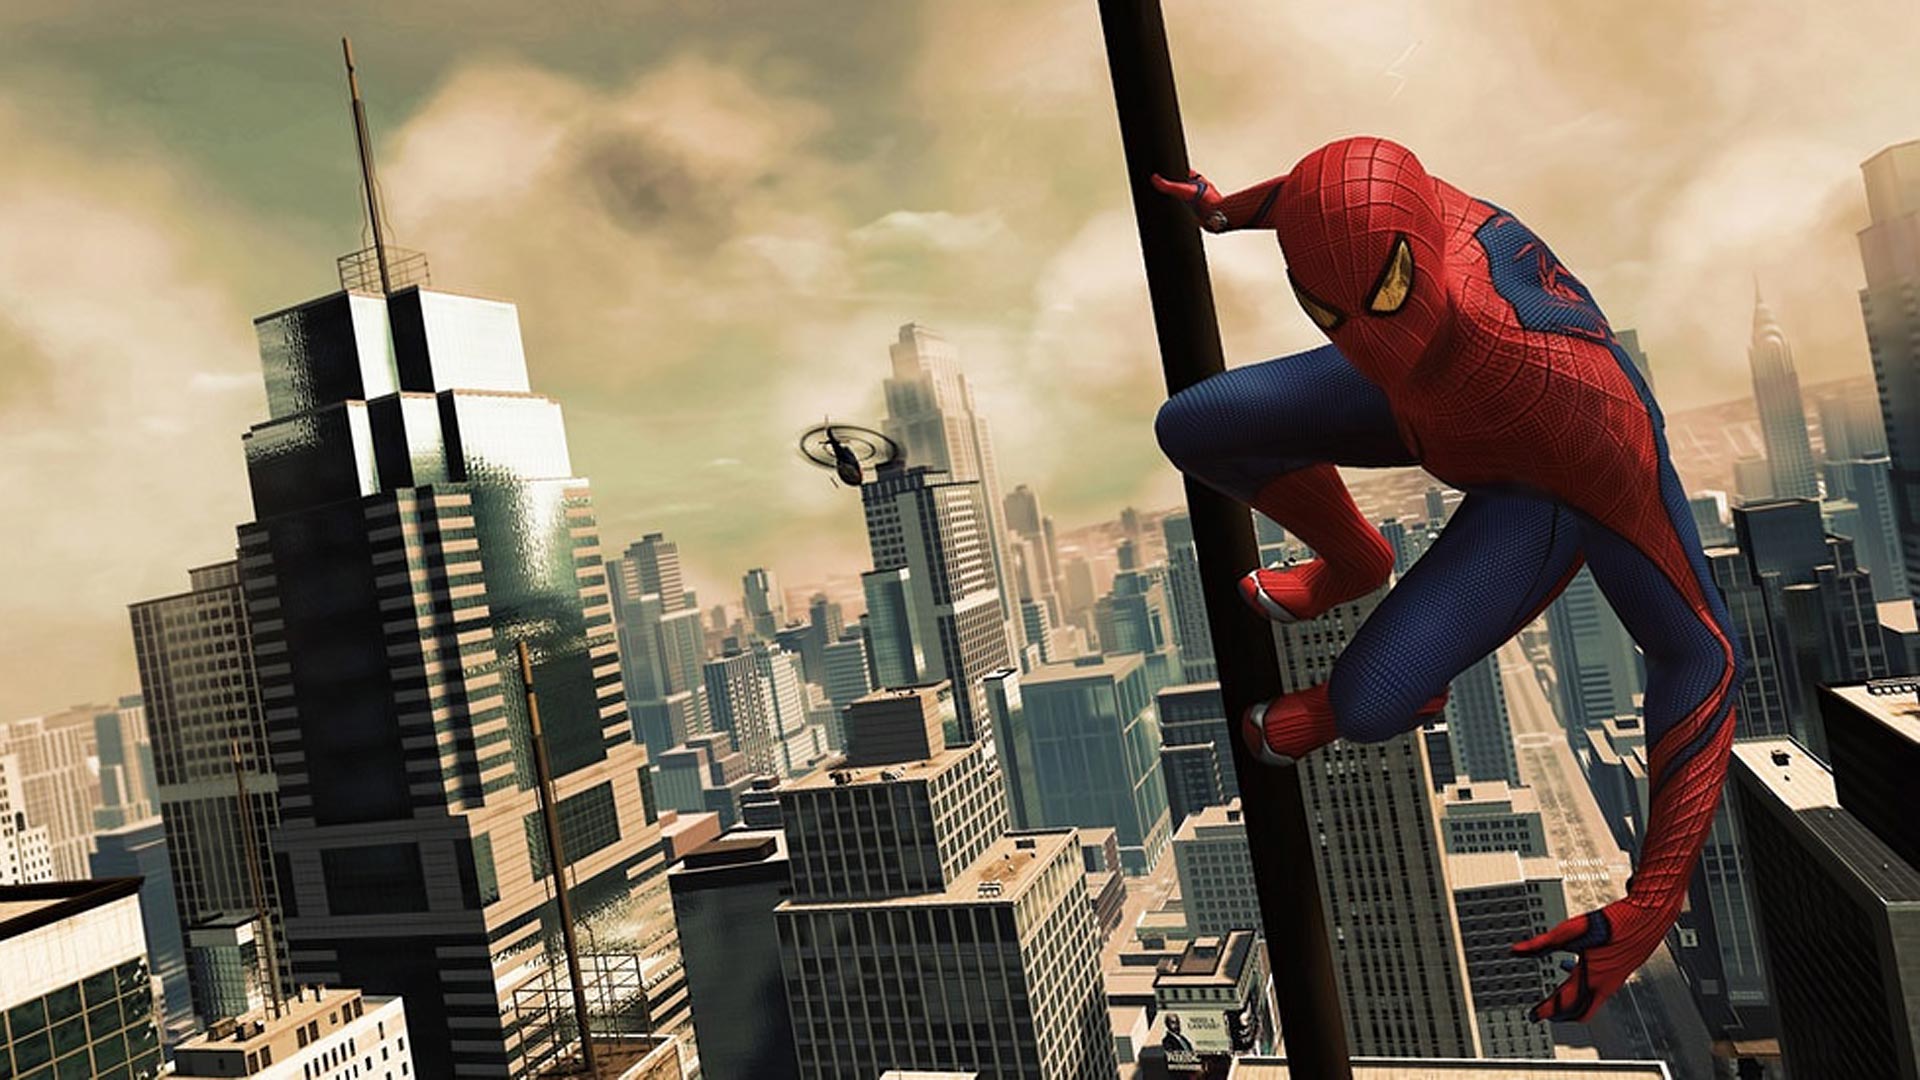 the amazing spider man hd wallpaper | wallpapers55.com - Best ...